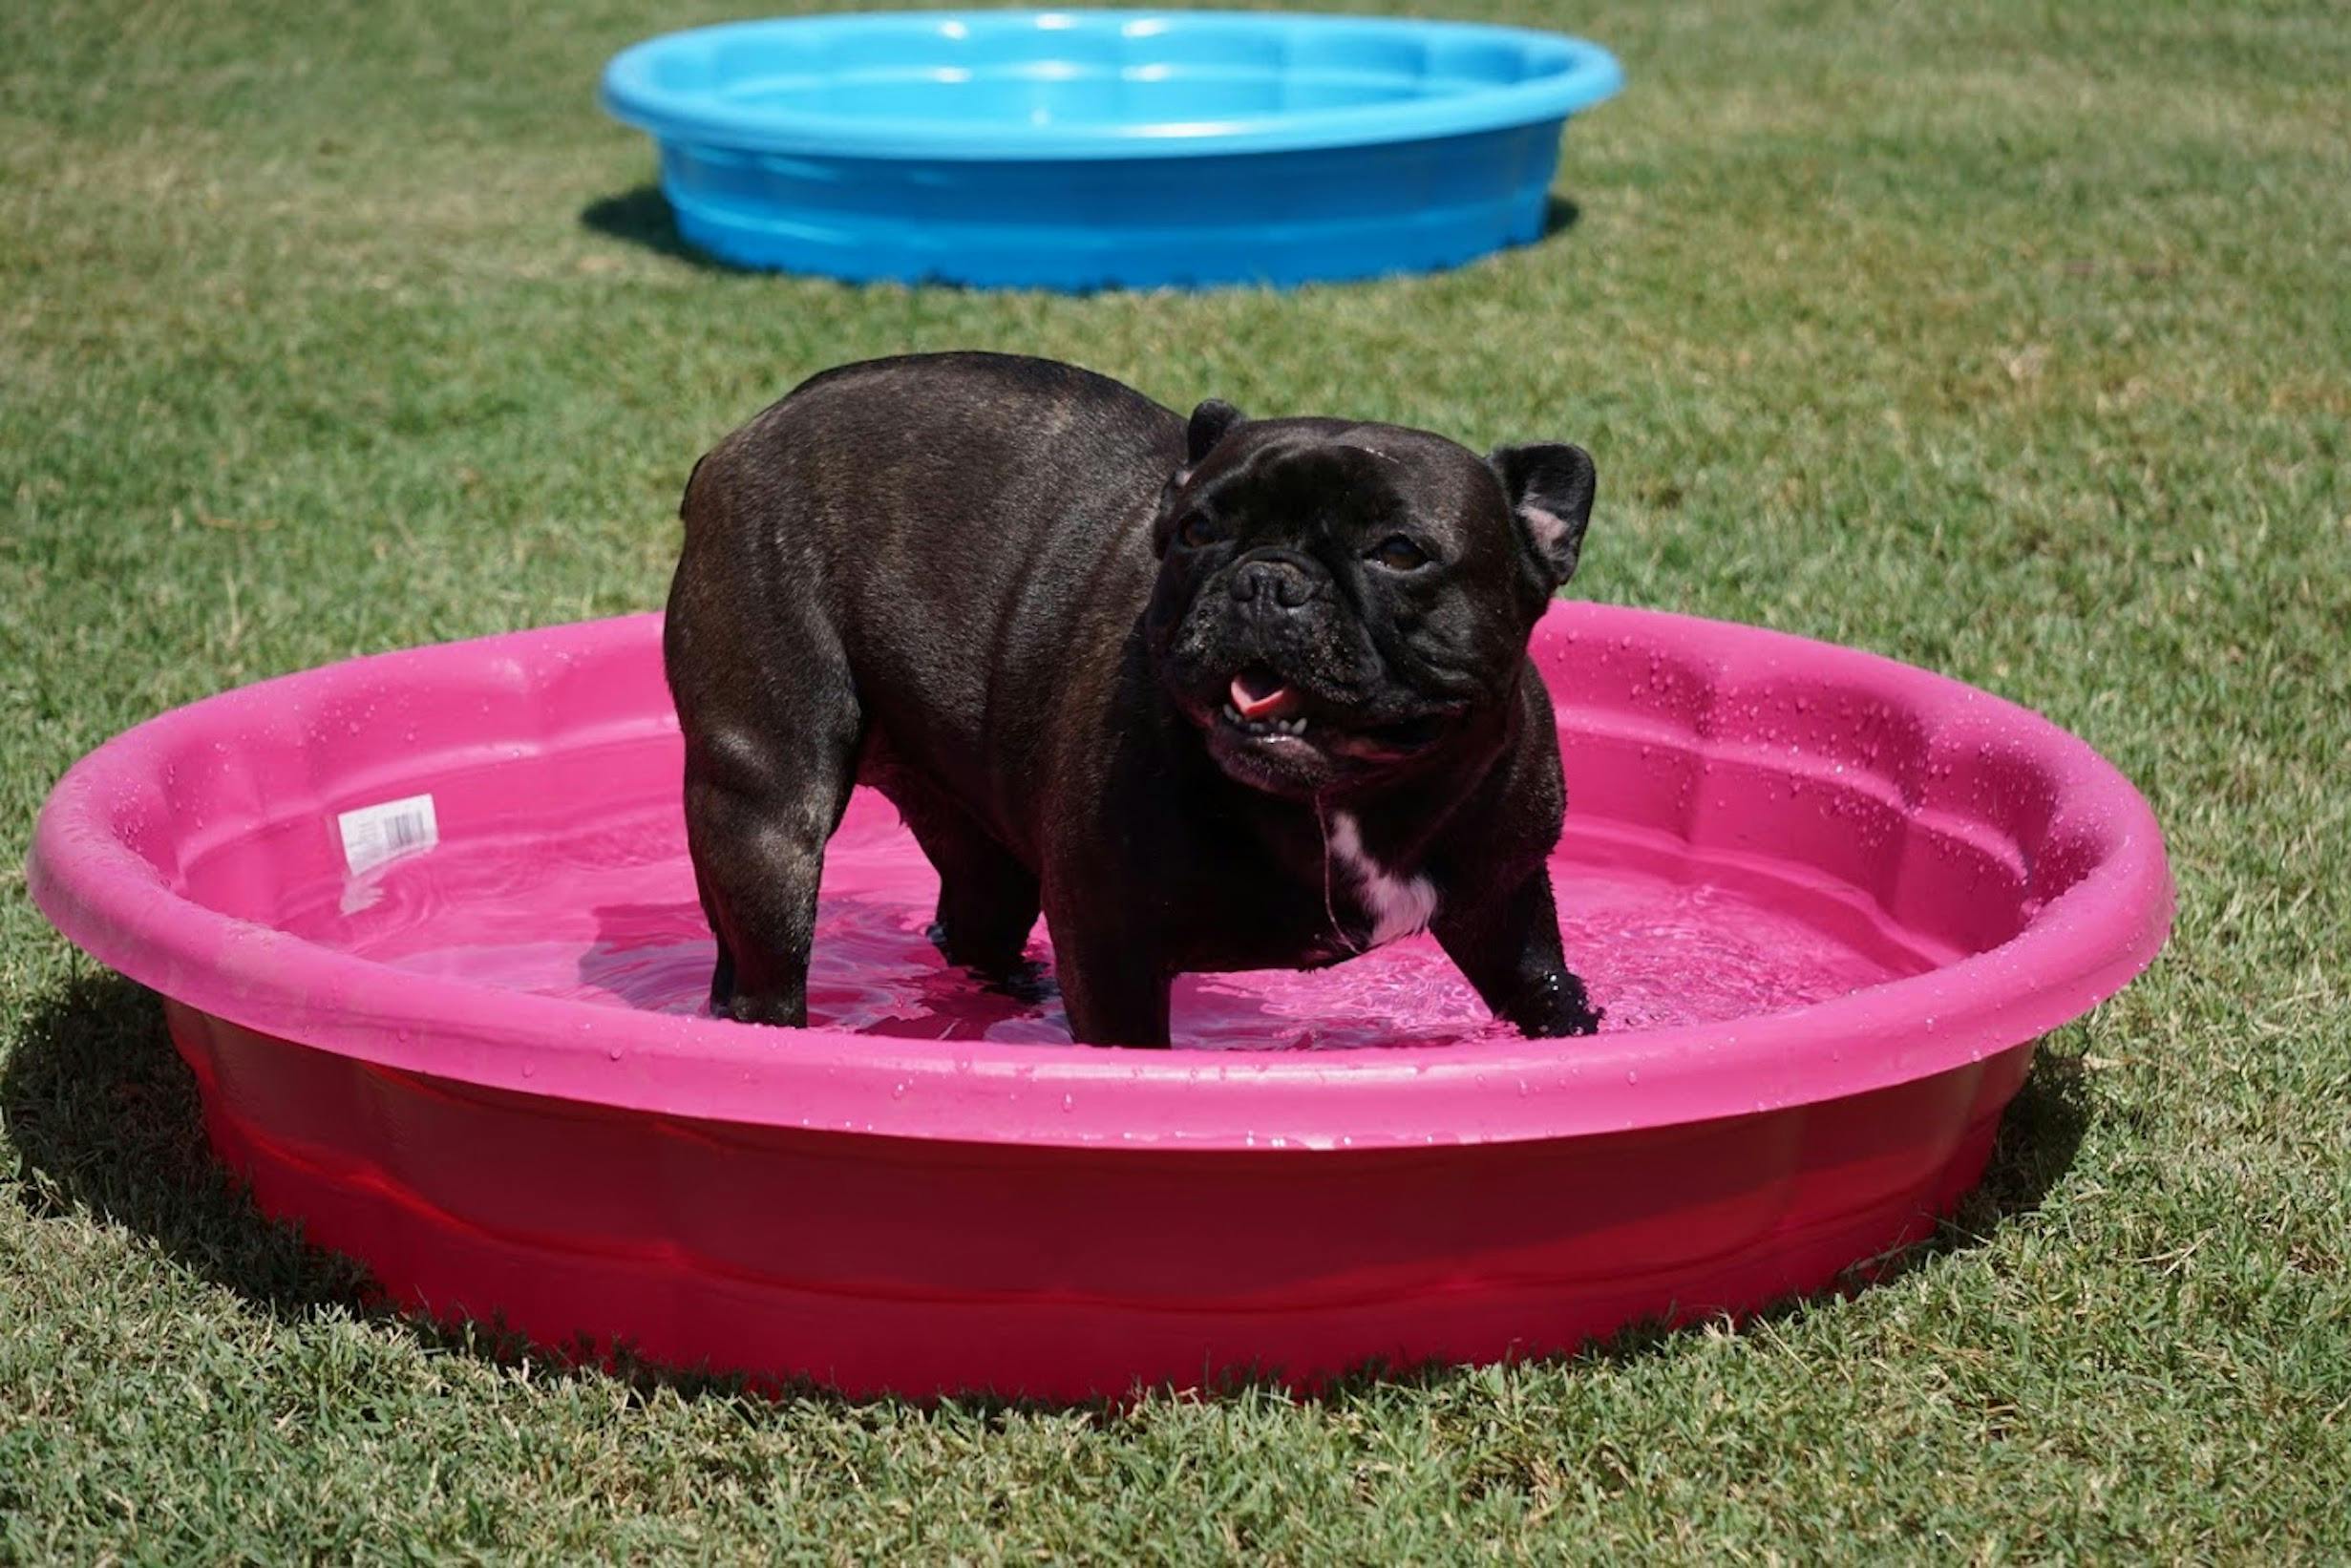 Free stock photo of dog in pink pool, dog in pool, dog in water